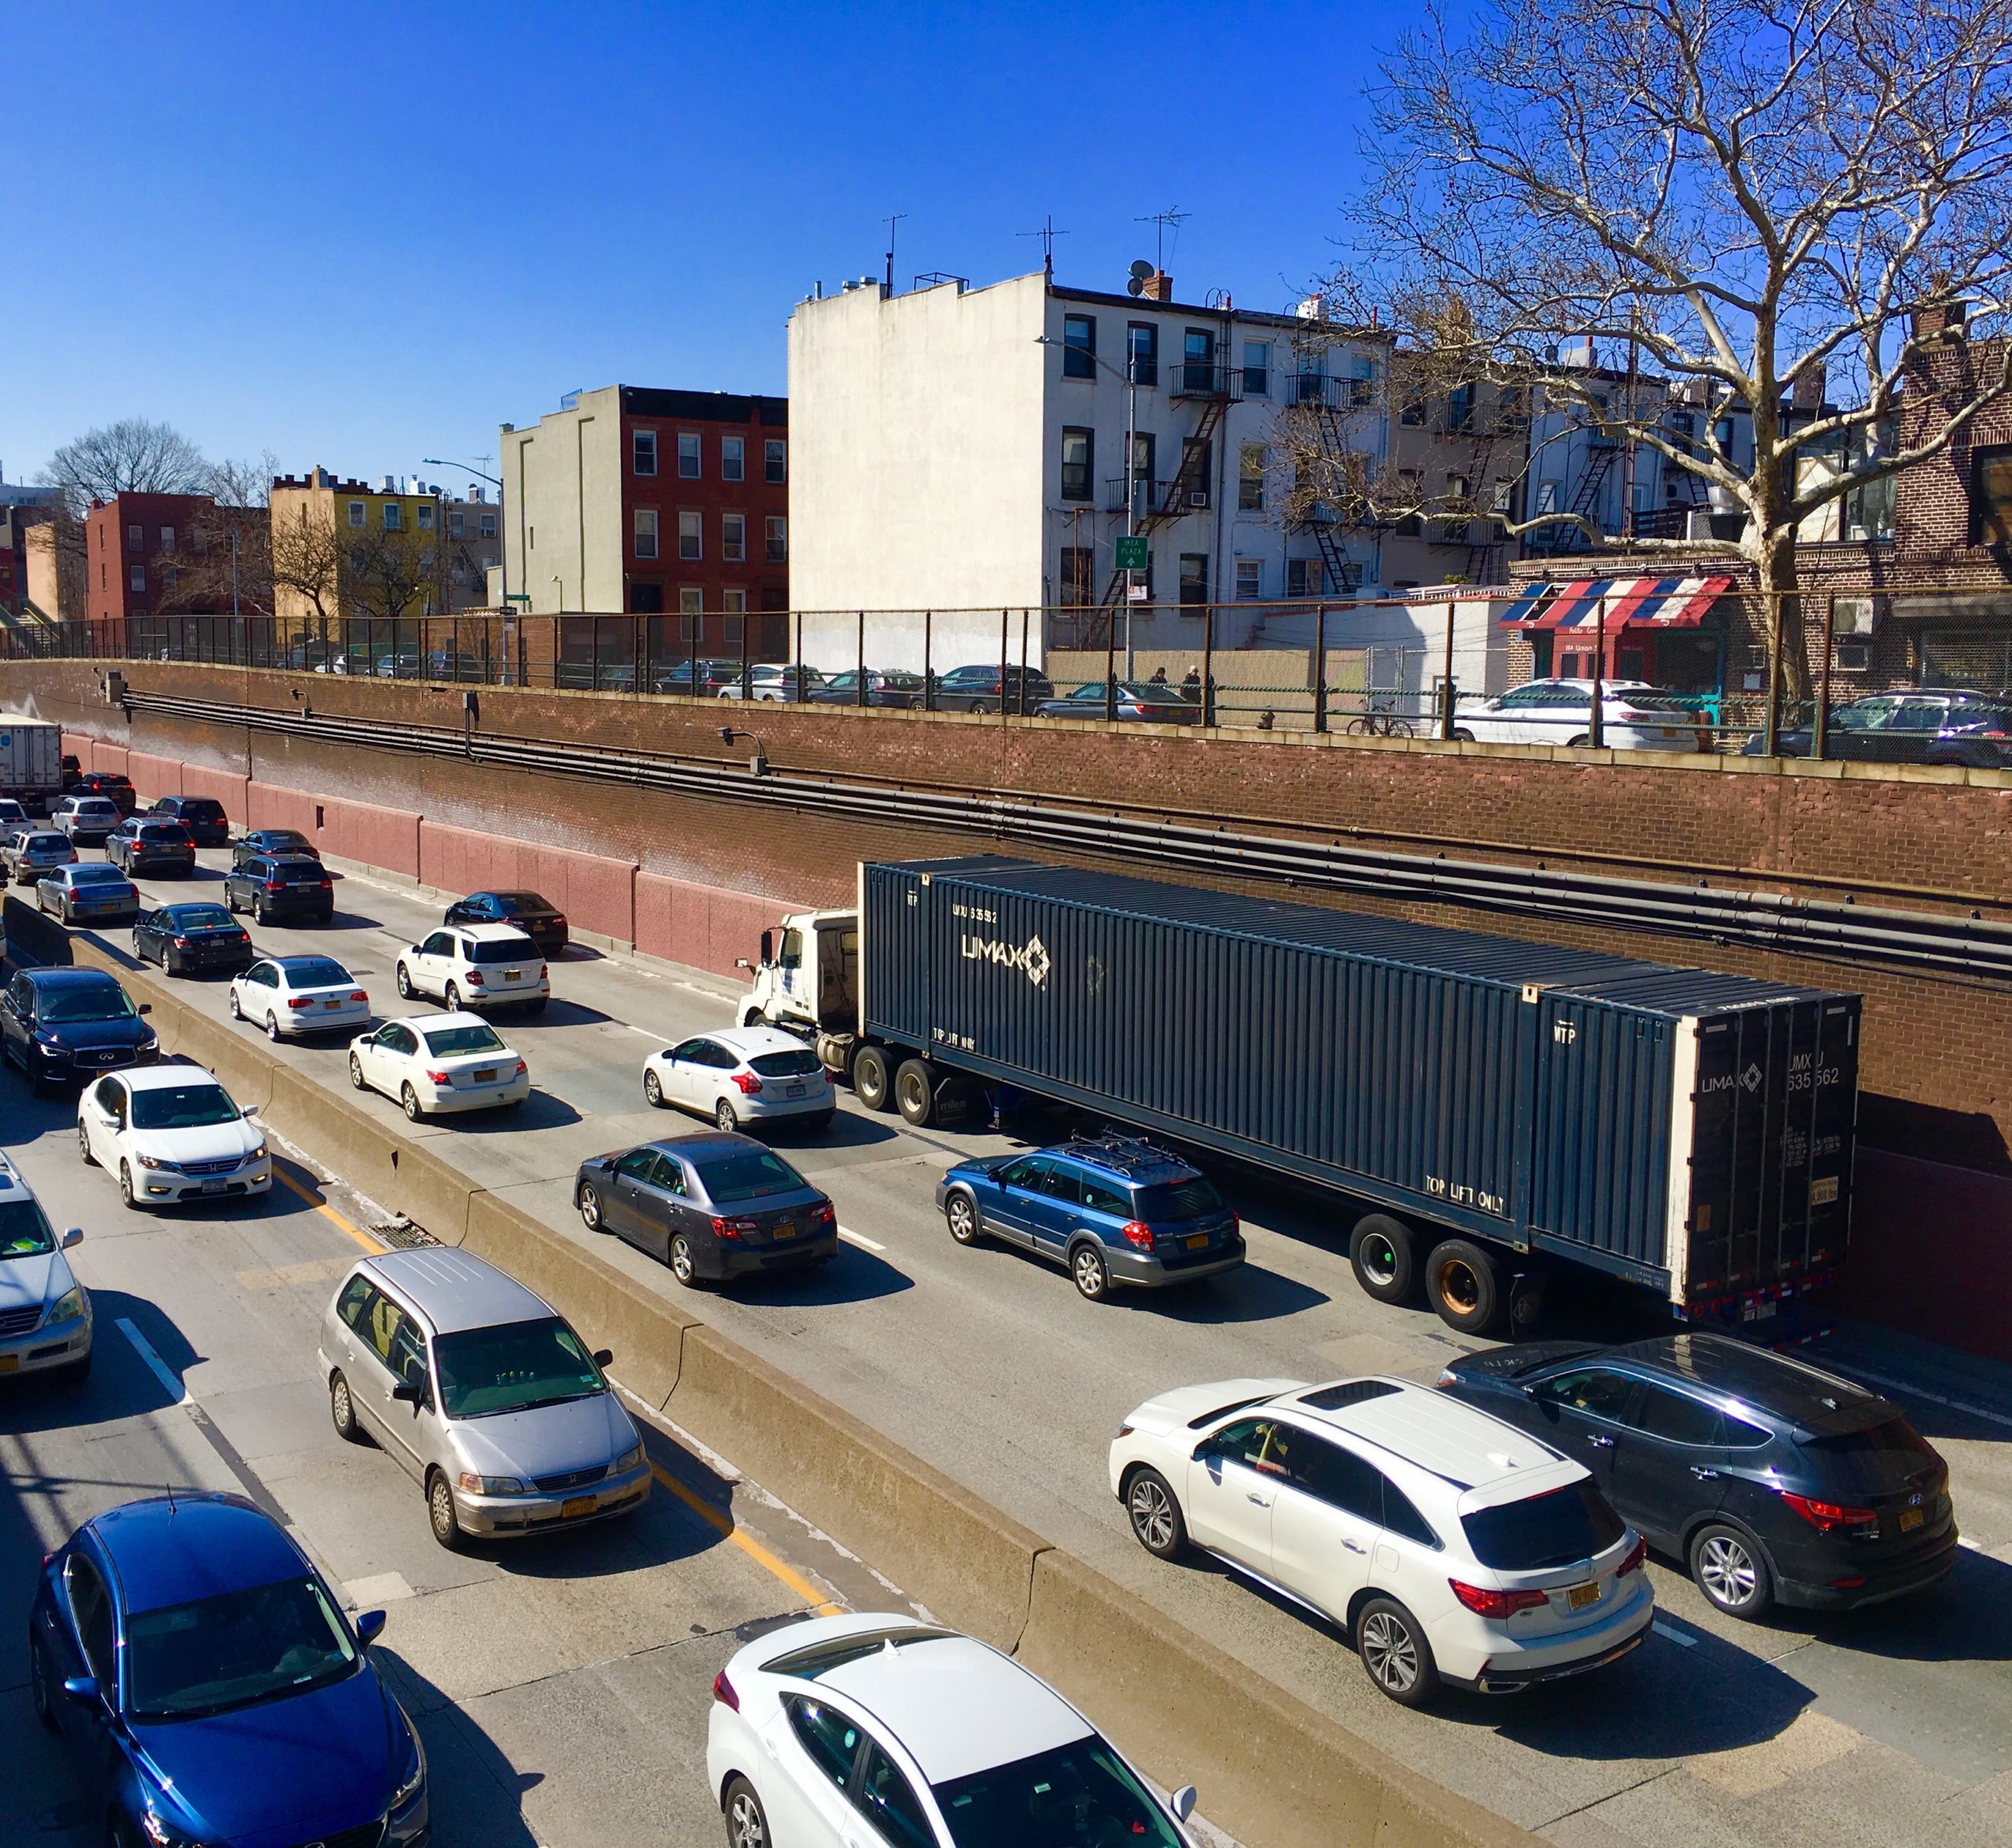 The BQE trench in Cobble Hill. Photo: Lore Croghan/Brooklyn Eagle